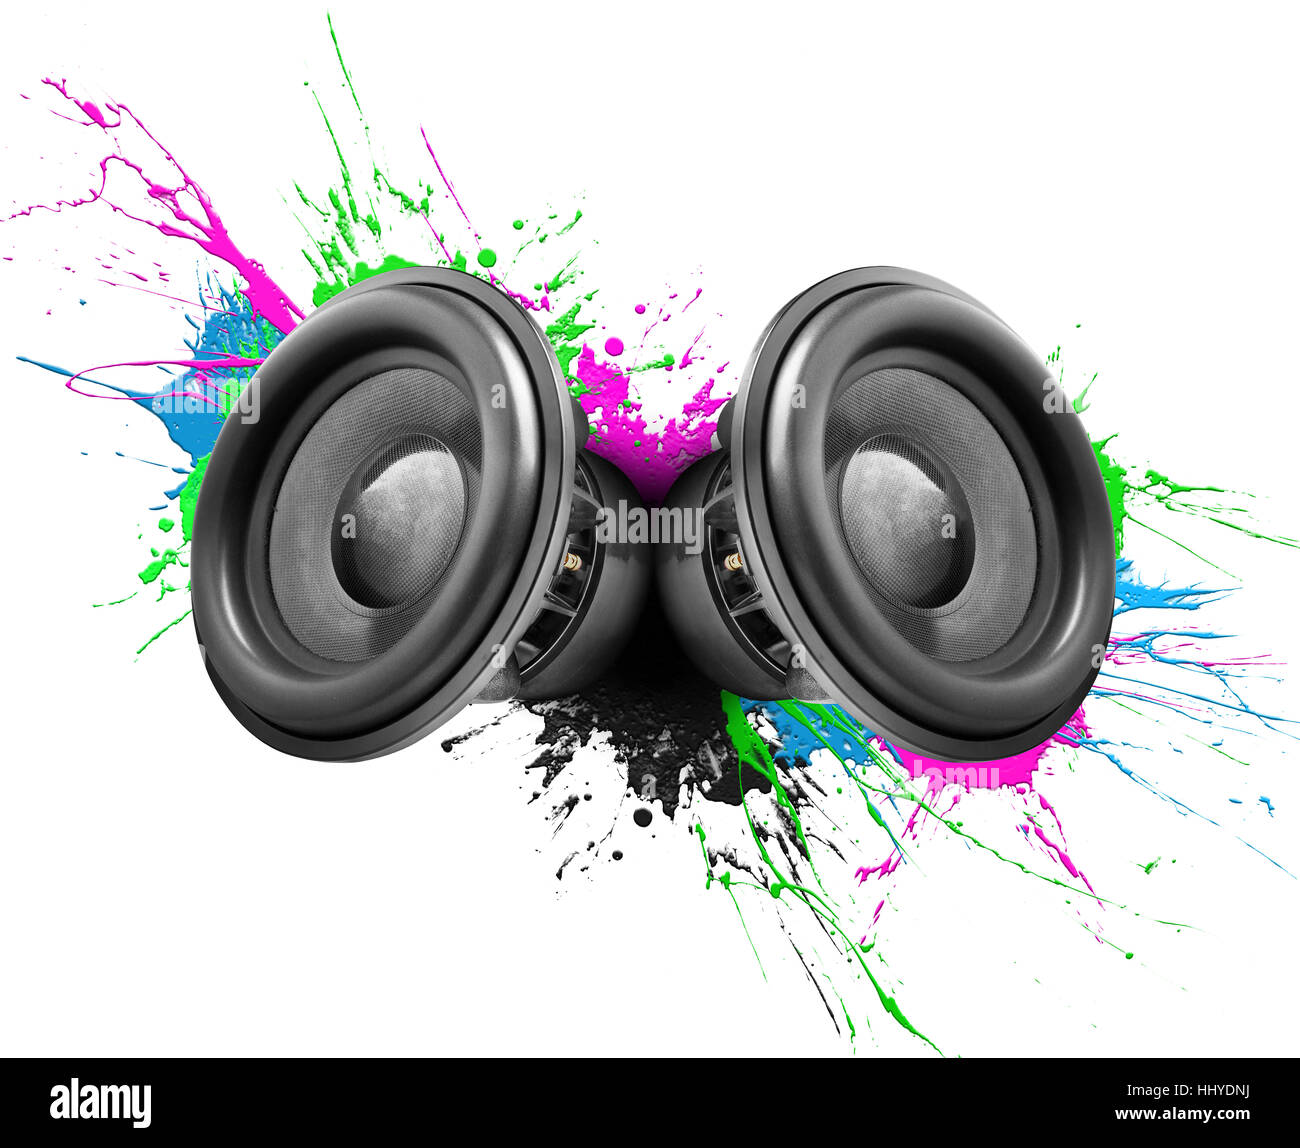 Music speakers with colorful paint splashes on white background Stock Photo